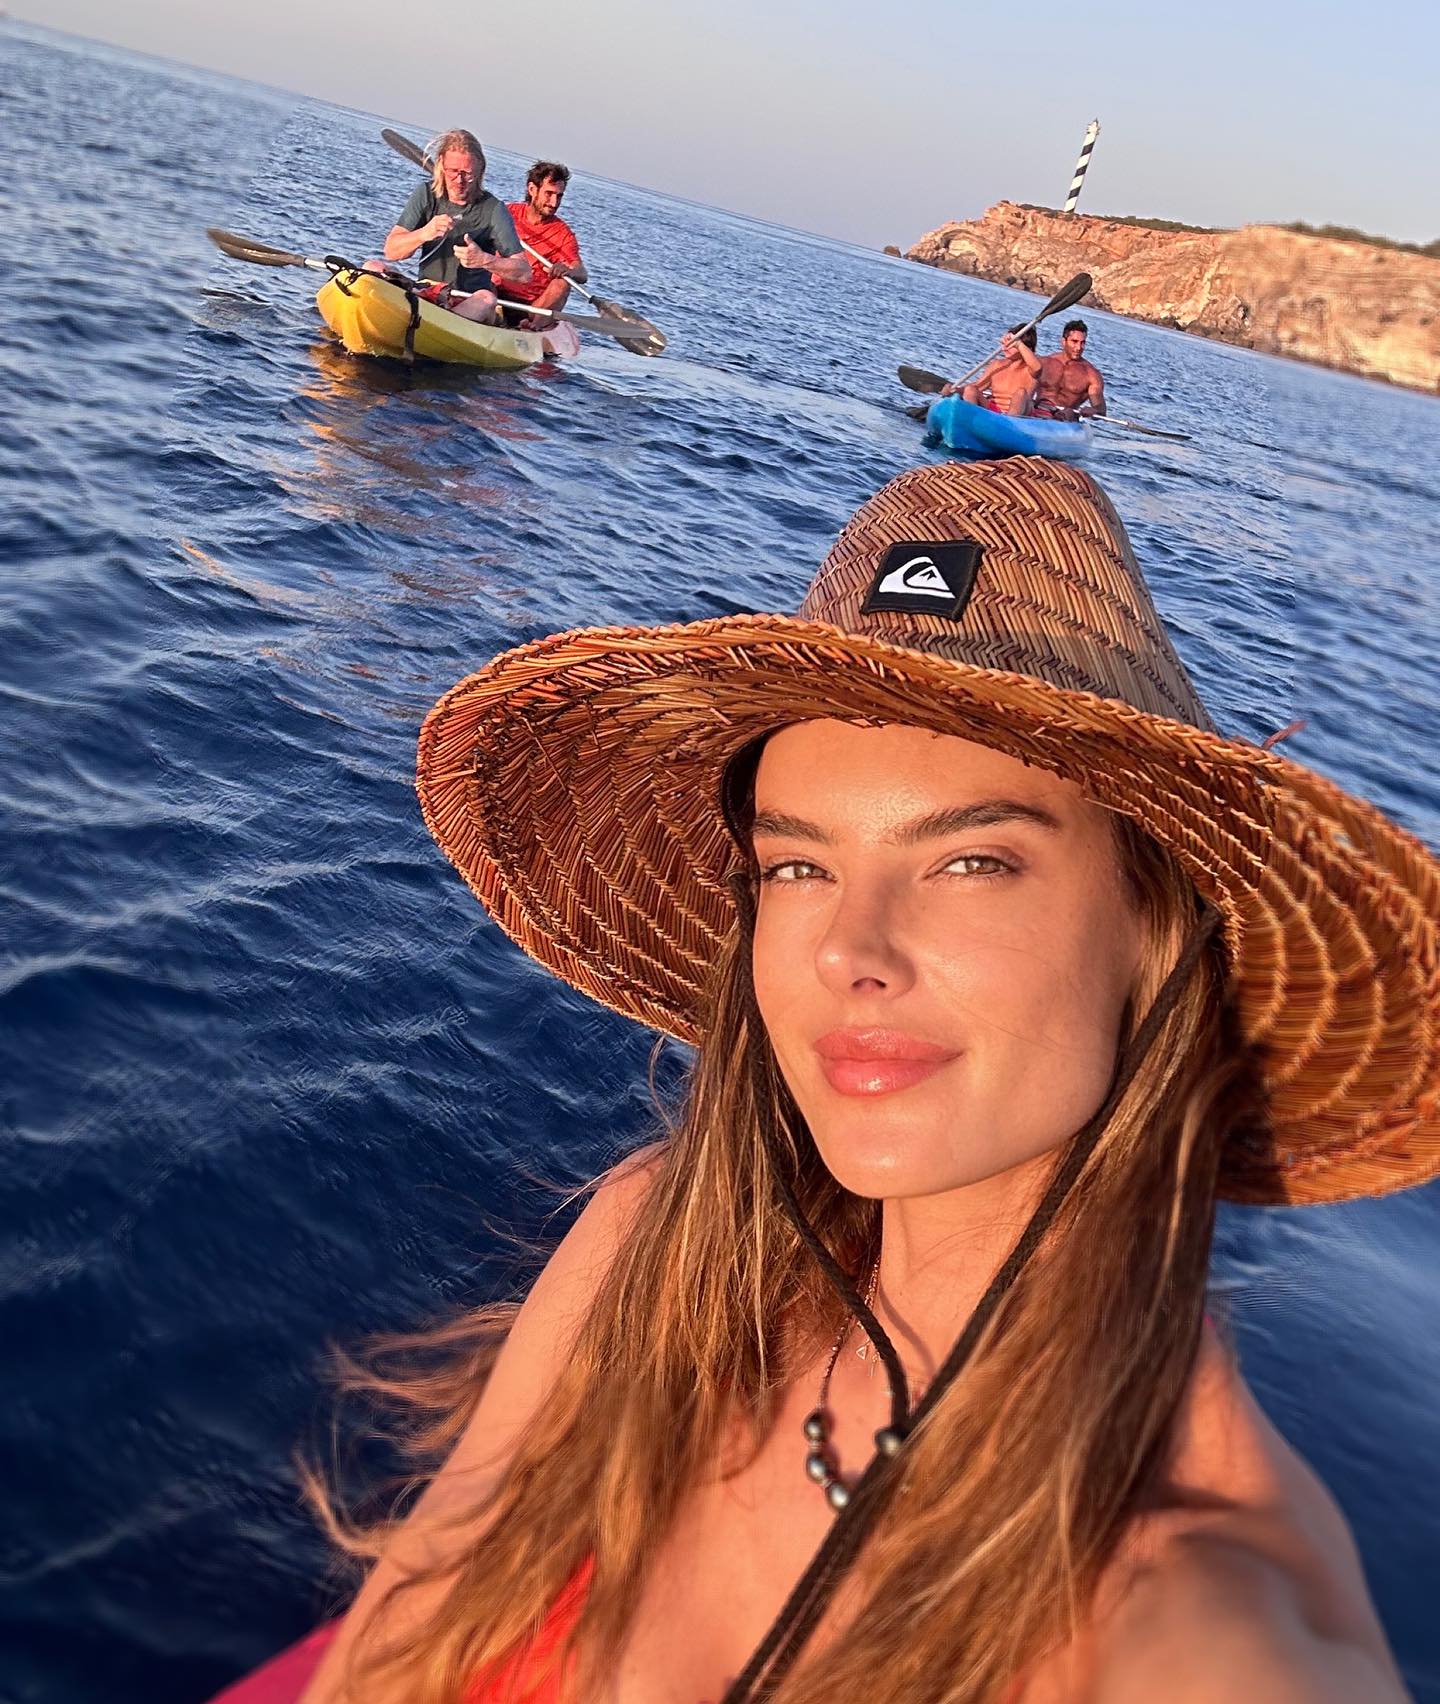 Photos n°31 : Alessandra Ambrosio is Making Waves!